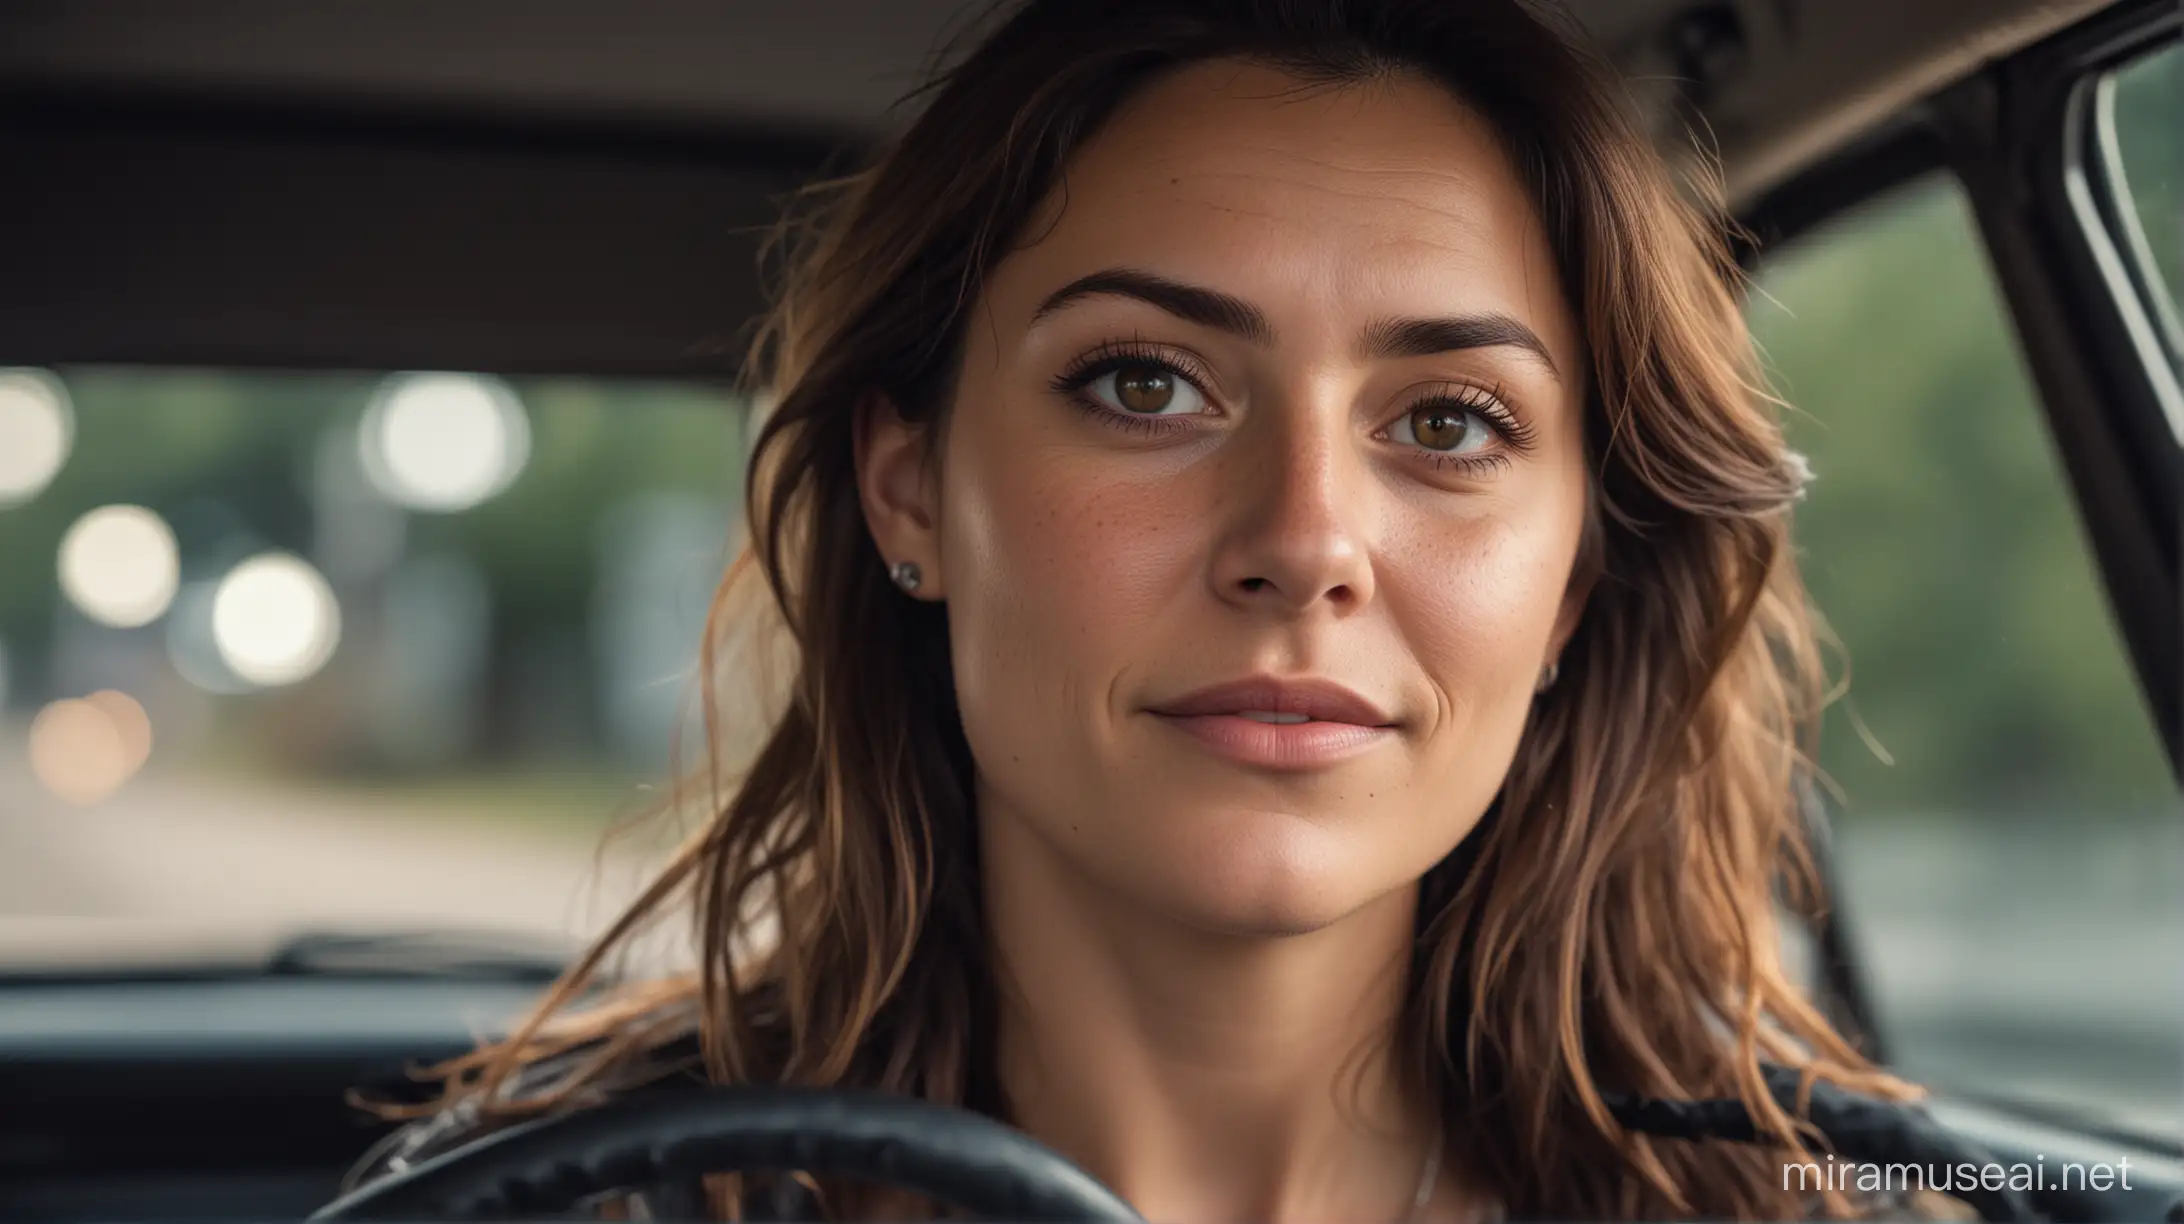 Determined Woman Driving Car Moody Atmosphere with Dynamic Pose